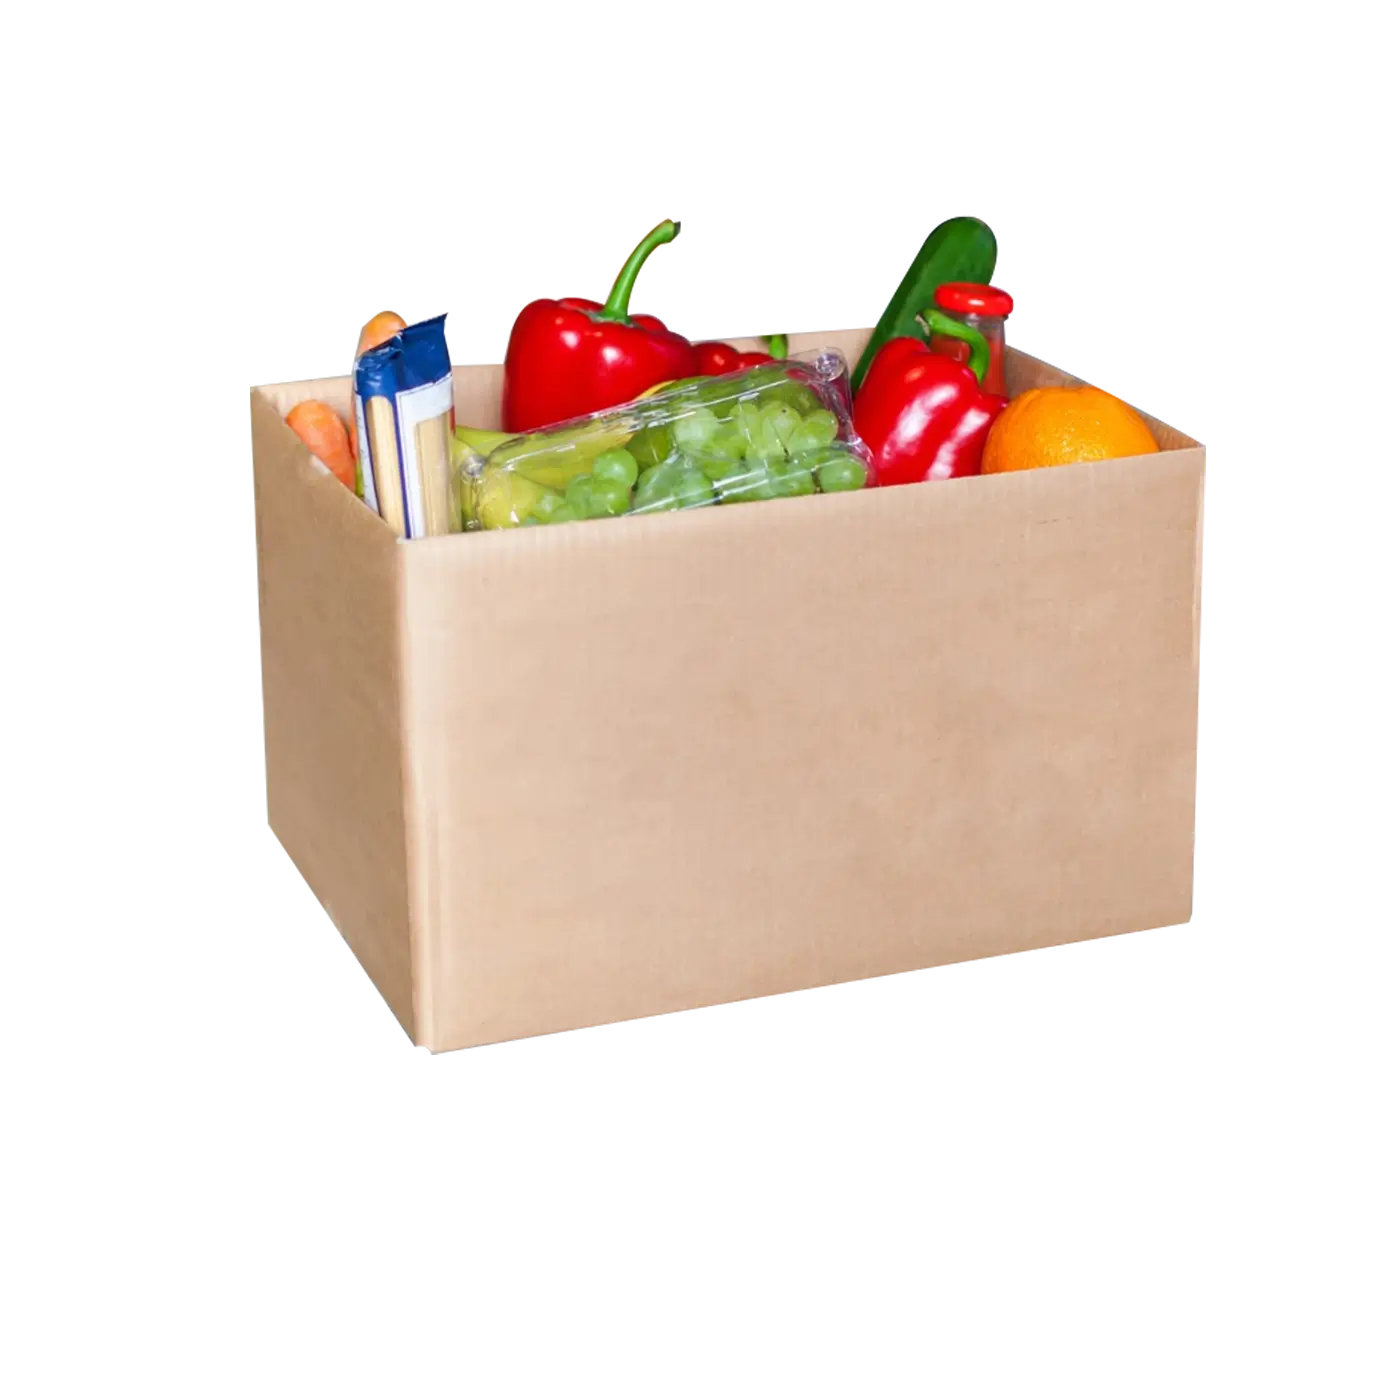 Custom Food Shipping Box Custom Packaging Solutions by qualitycustomboxes.com